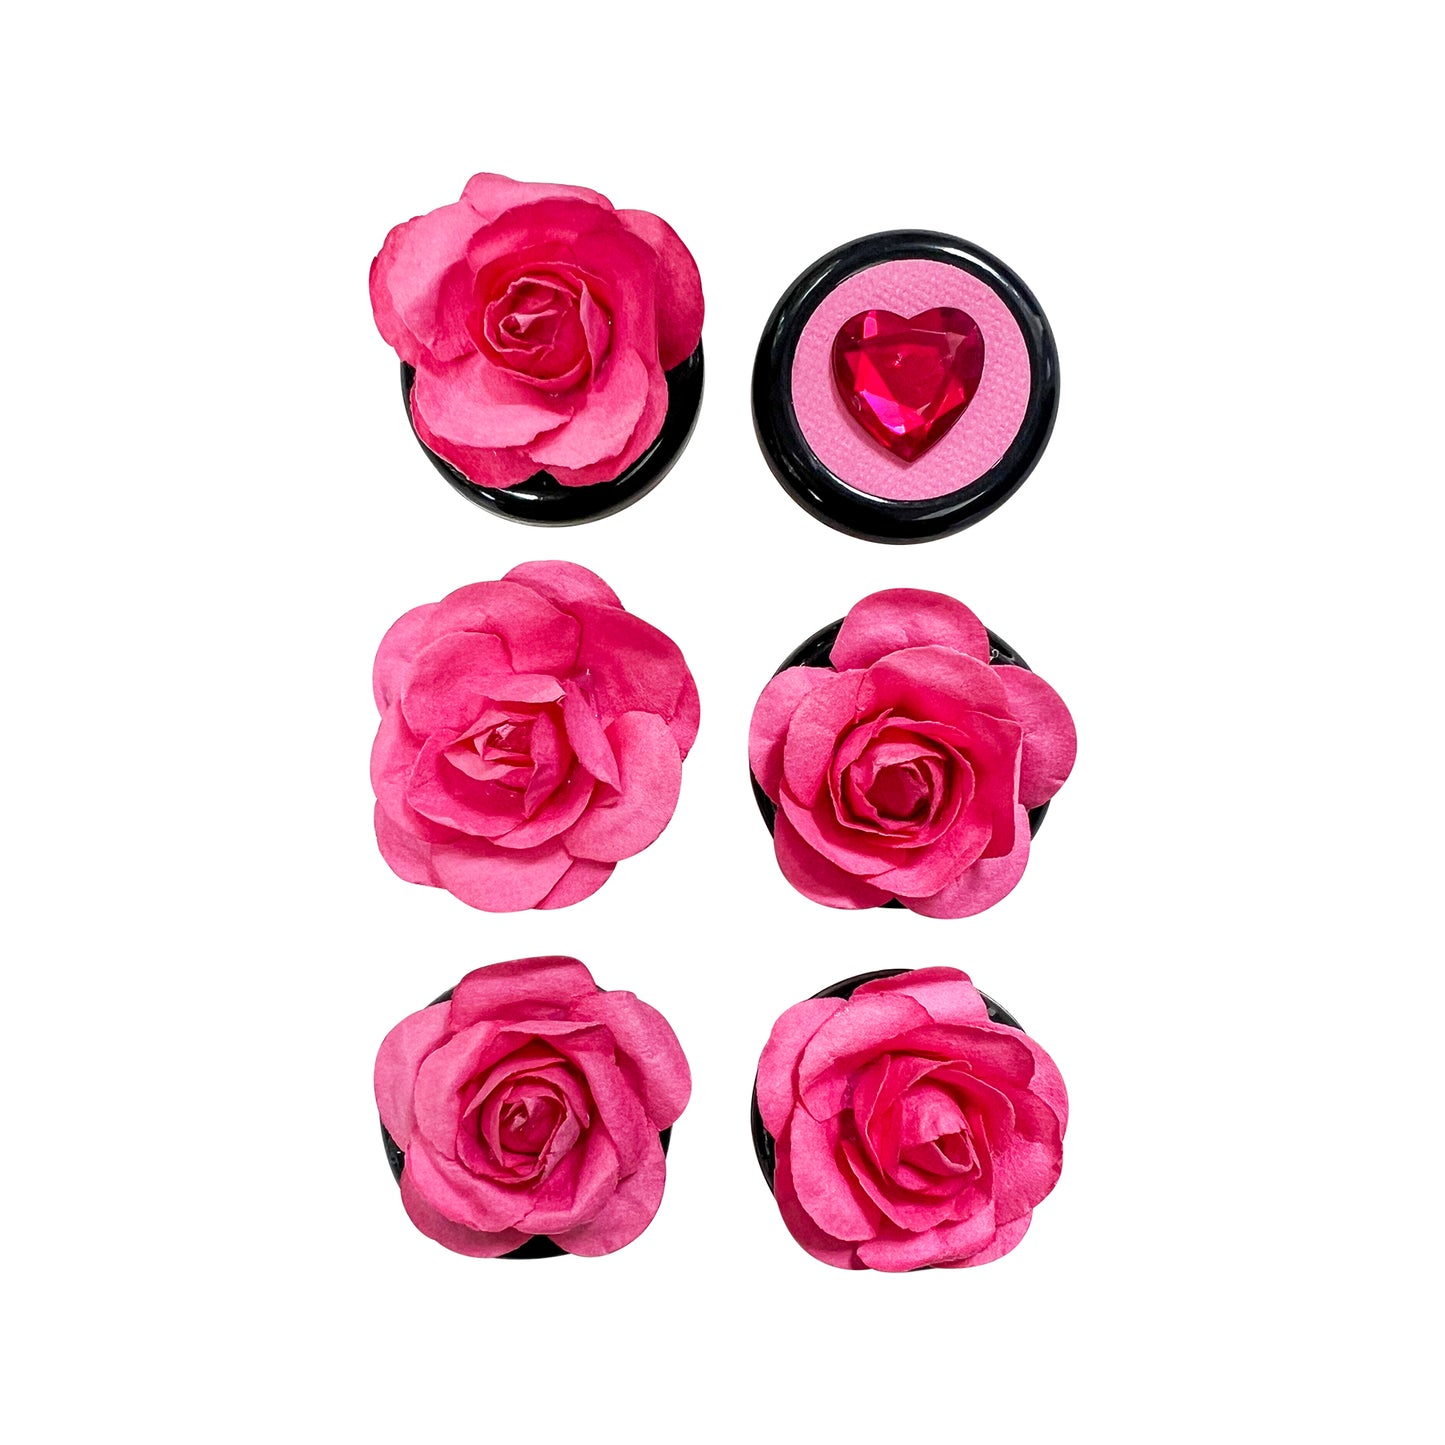 Set of 6 Bright Pink Flowers + Pink Gem Heart embellishments. 5 paper roses and 1 gem heart atop black buttons.